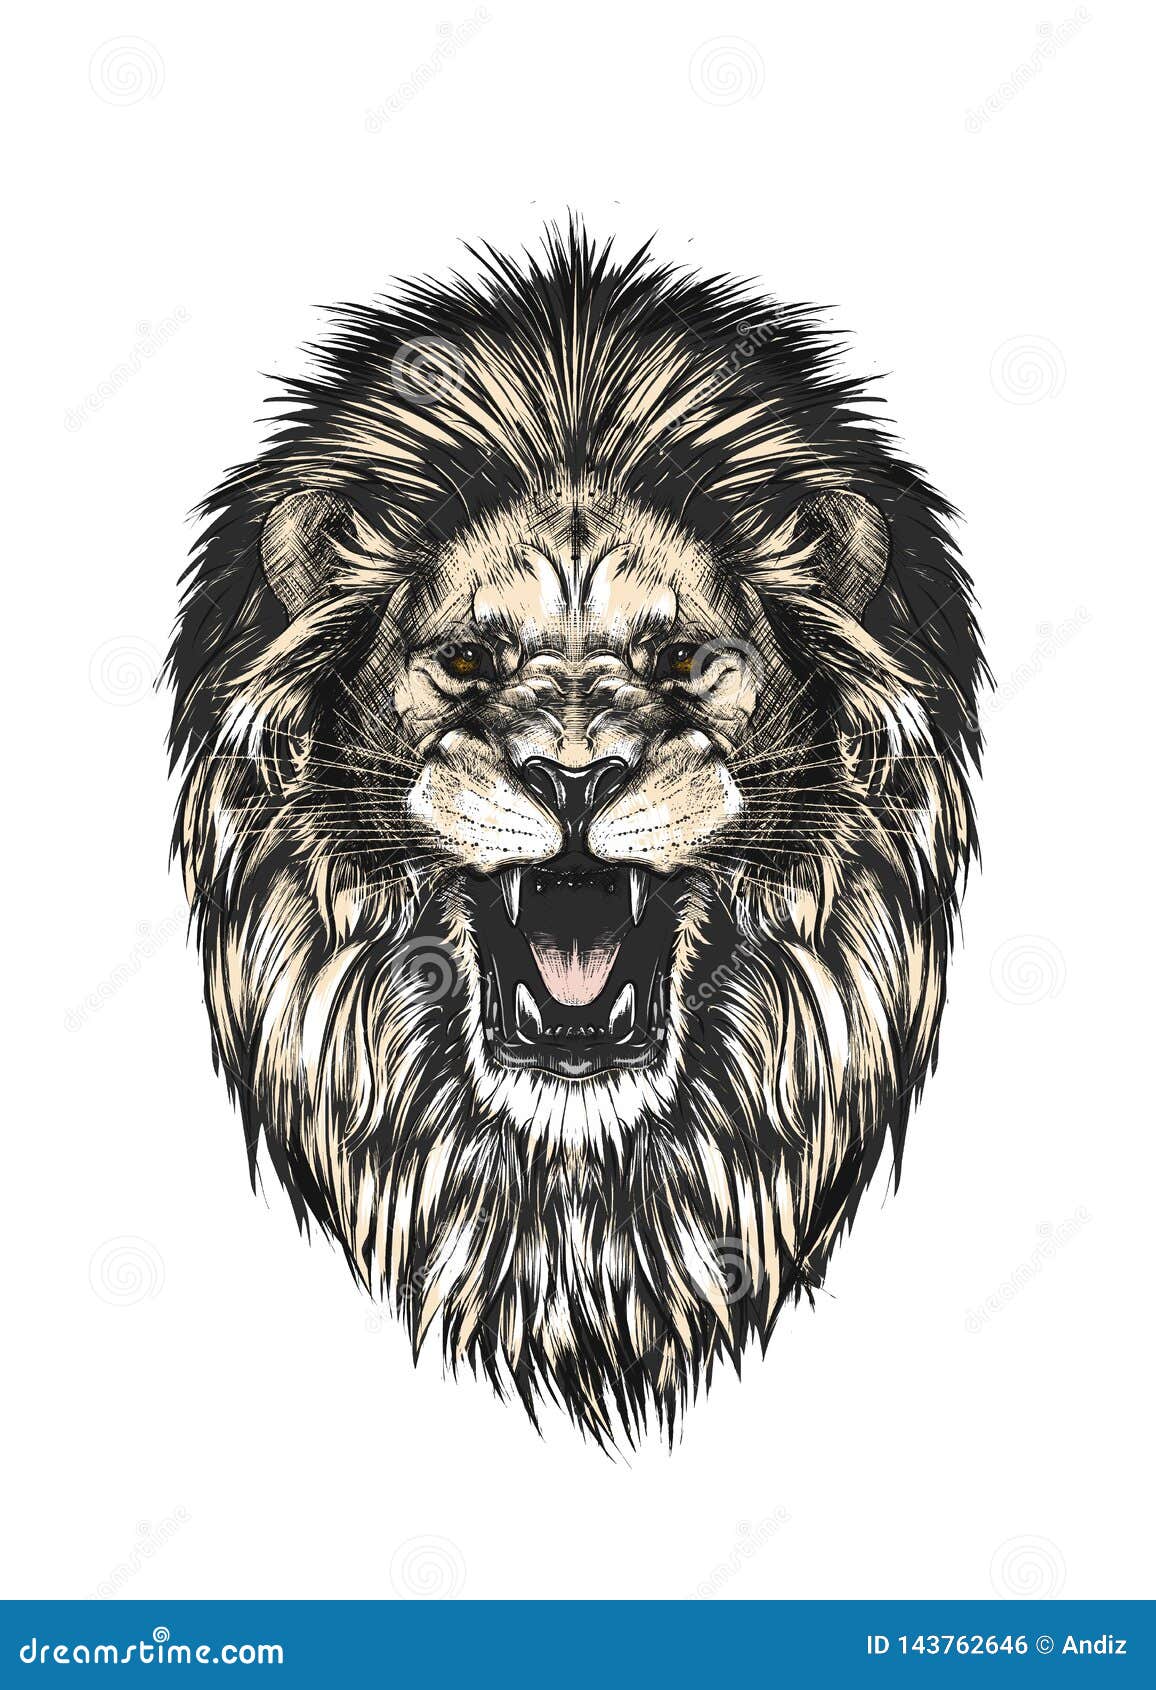 Aggregate more than 79 lion drawing tattoo latest  thtantai2